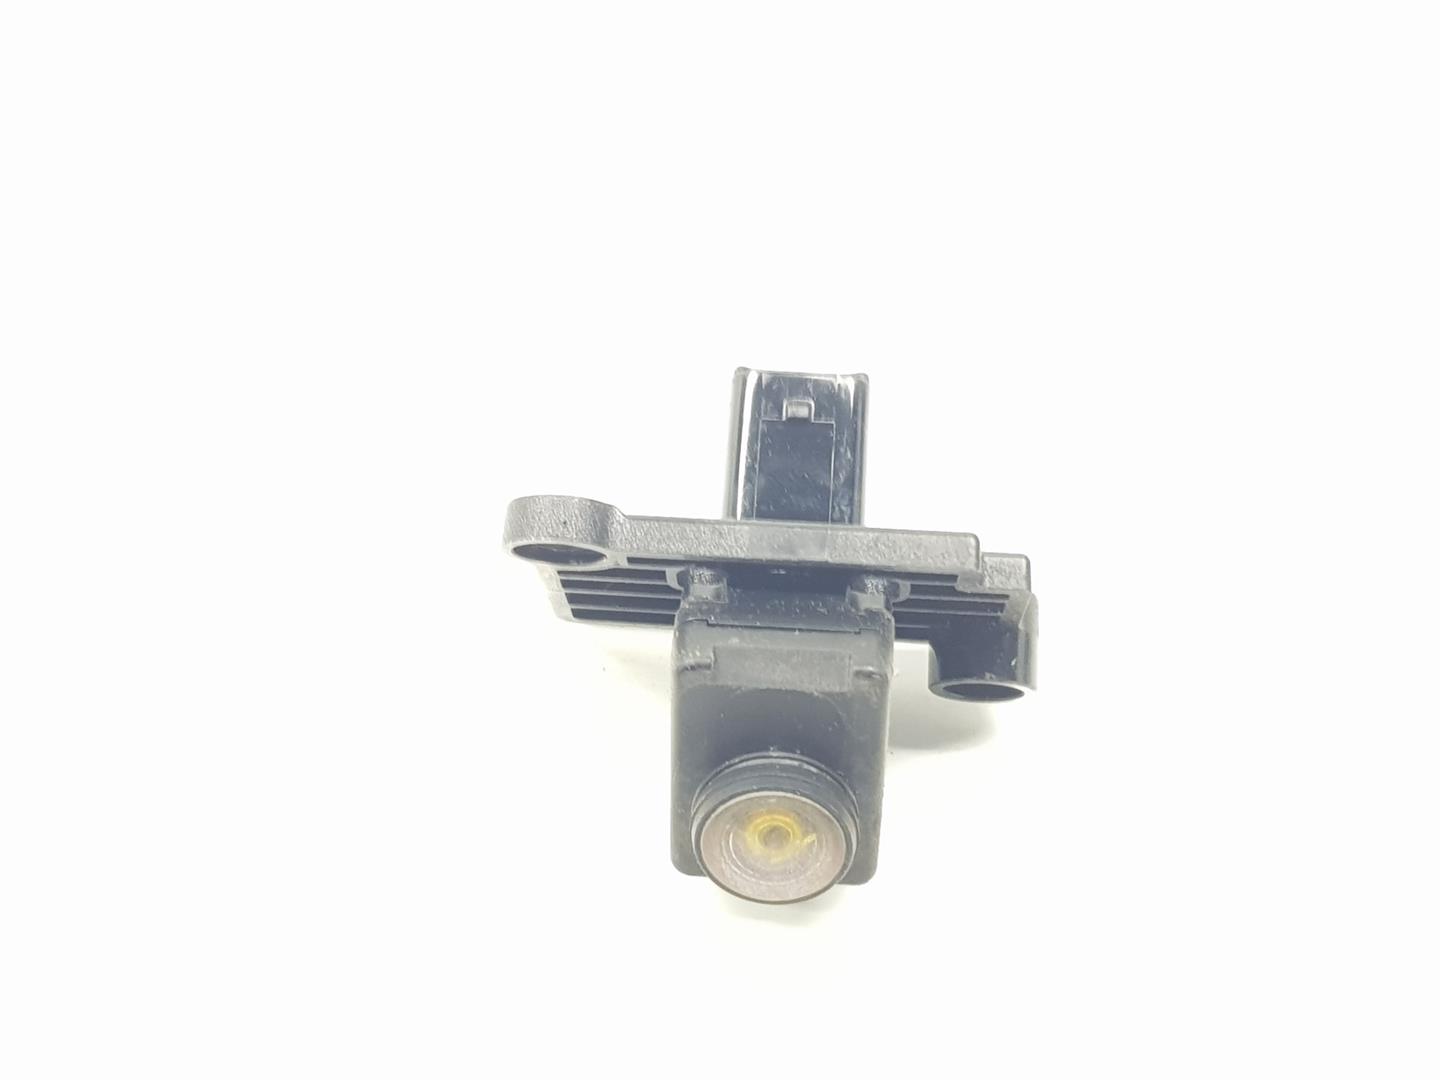 RENAULT Tailgate  Rearview Camera 284427774R, 284427774R 24245891